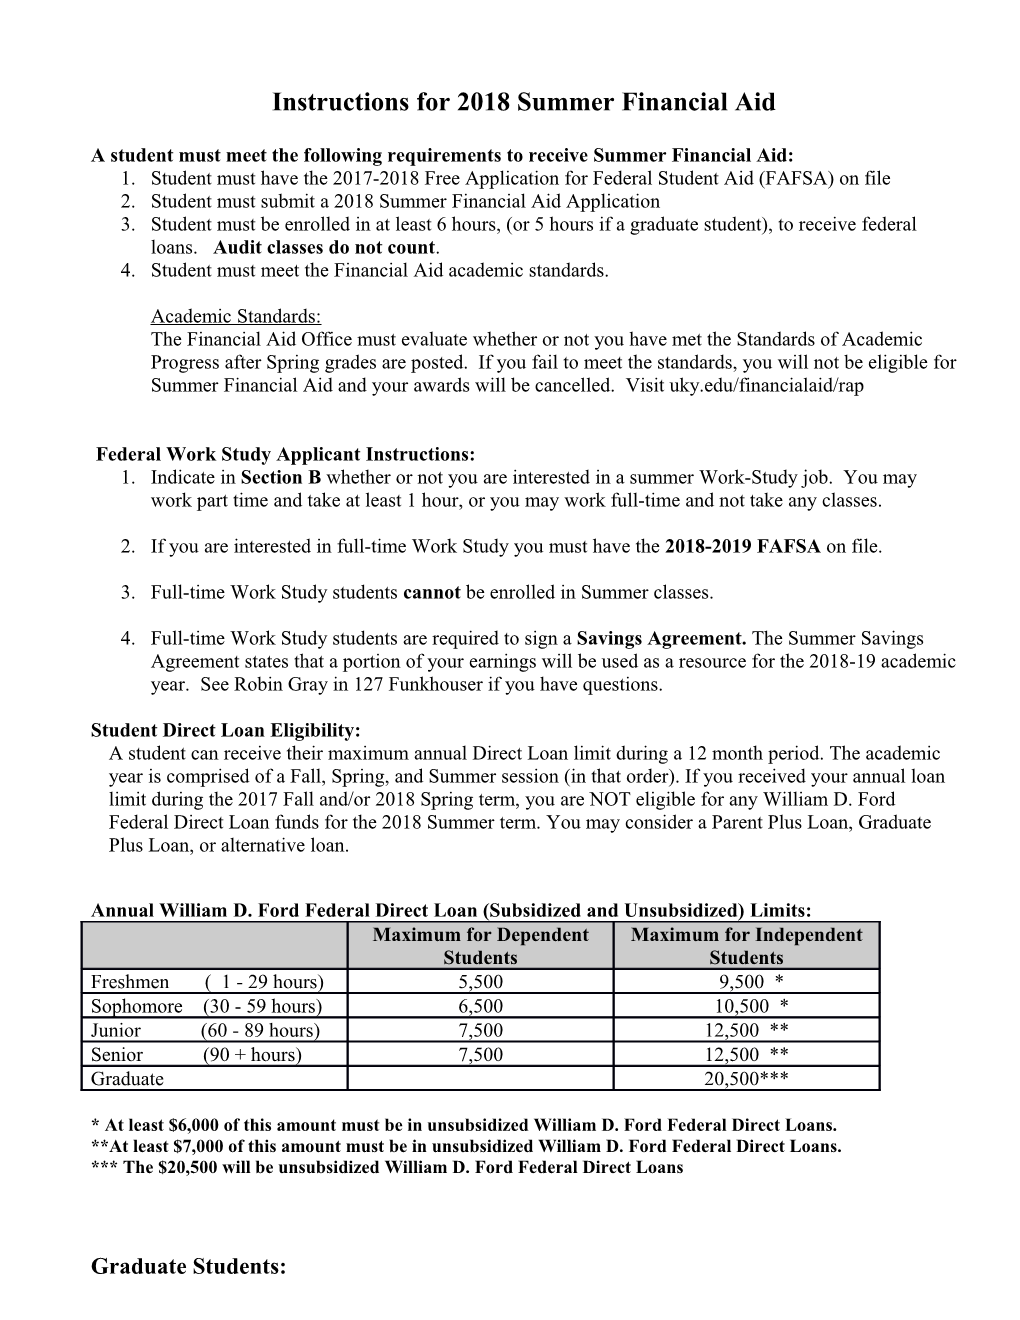 Instructions for 2005 Summer Financial Aid